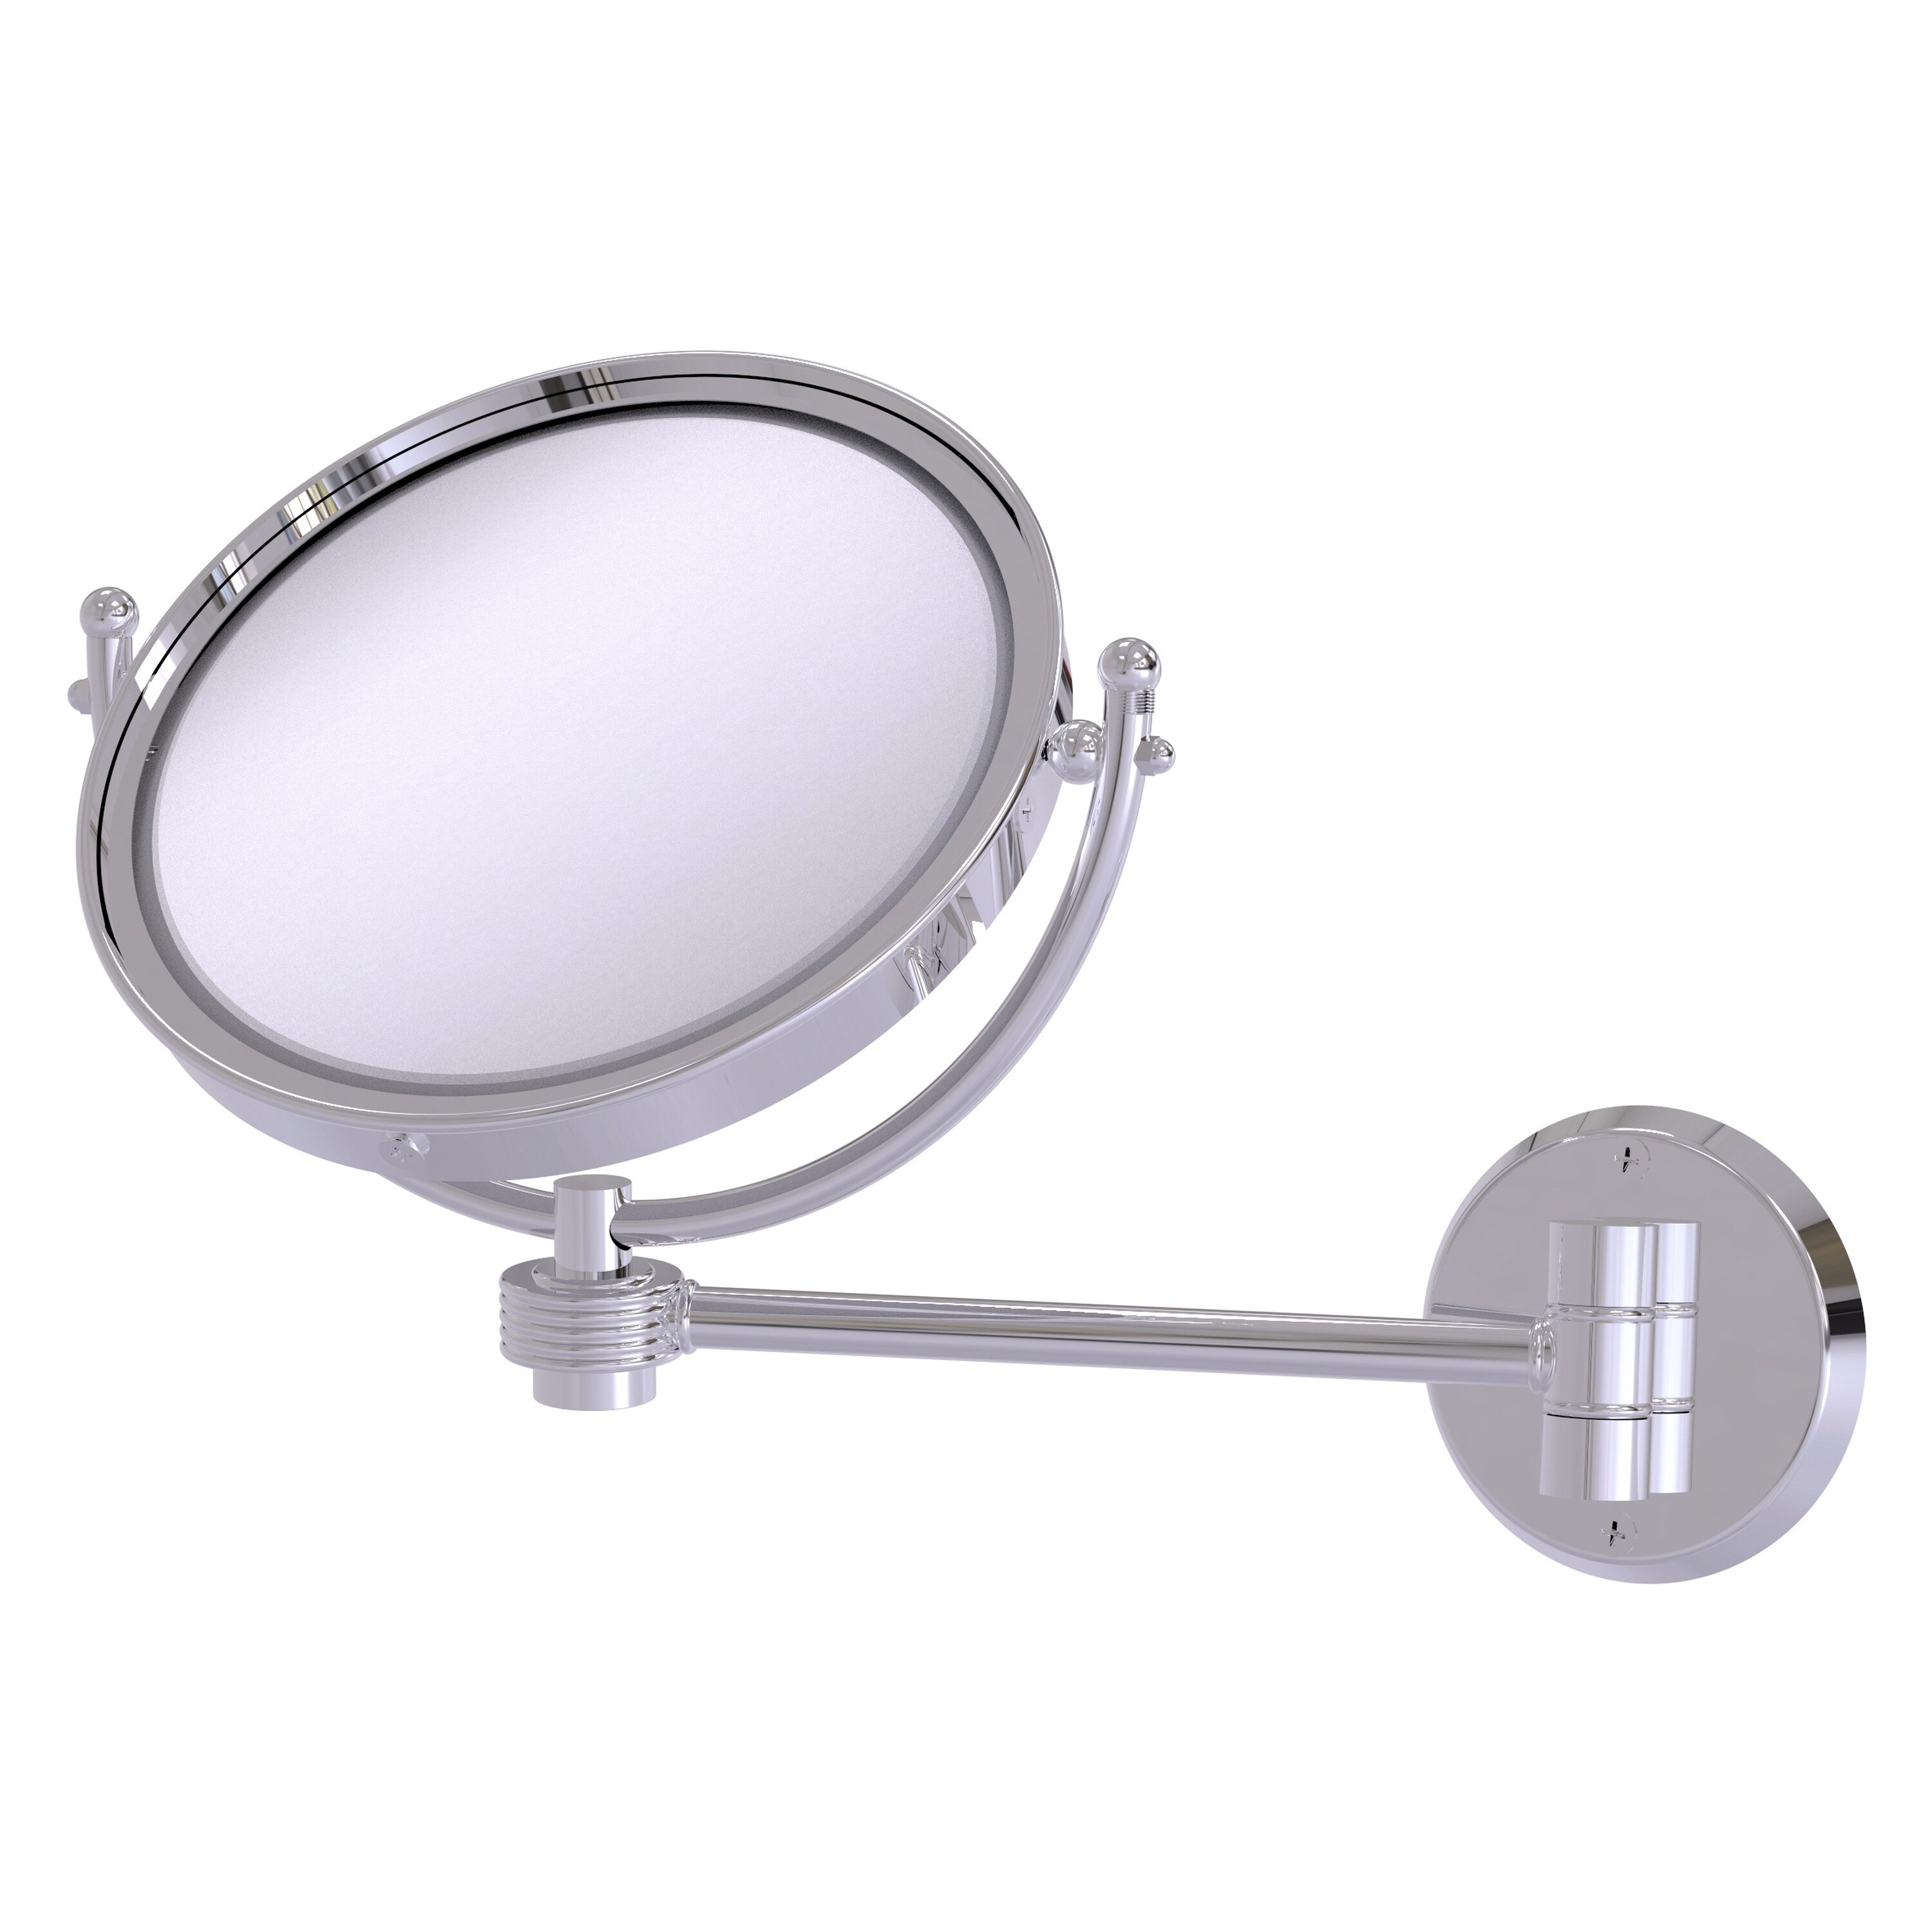 8-in x 10-in Polished Gold Double-sided 5X Magnifying Wall-mounted Vanity Mirror | - Allied Brass WM-5G/5X-PC